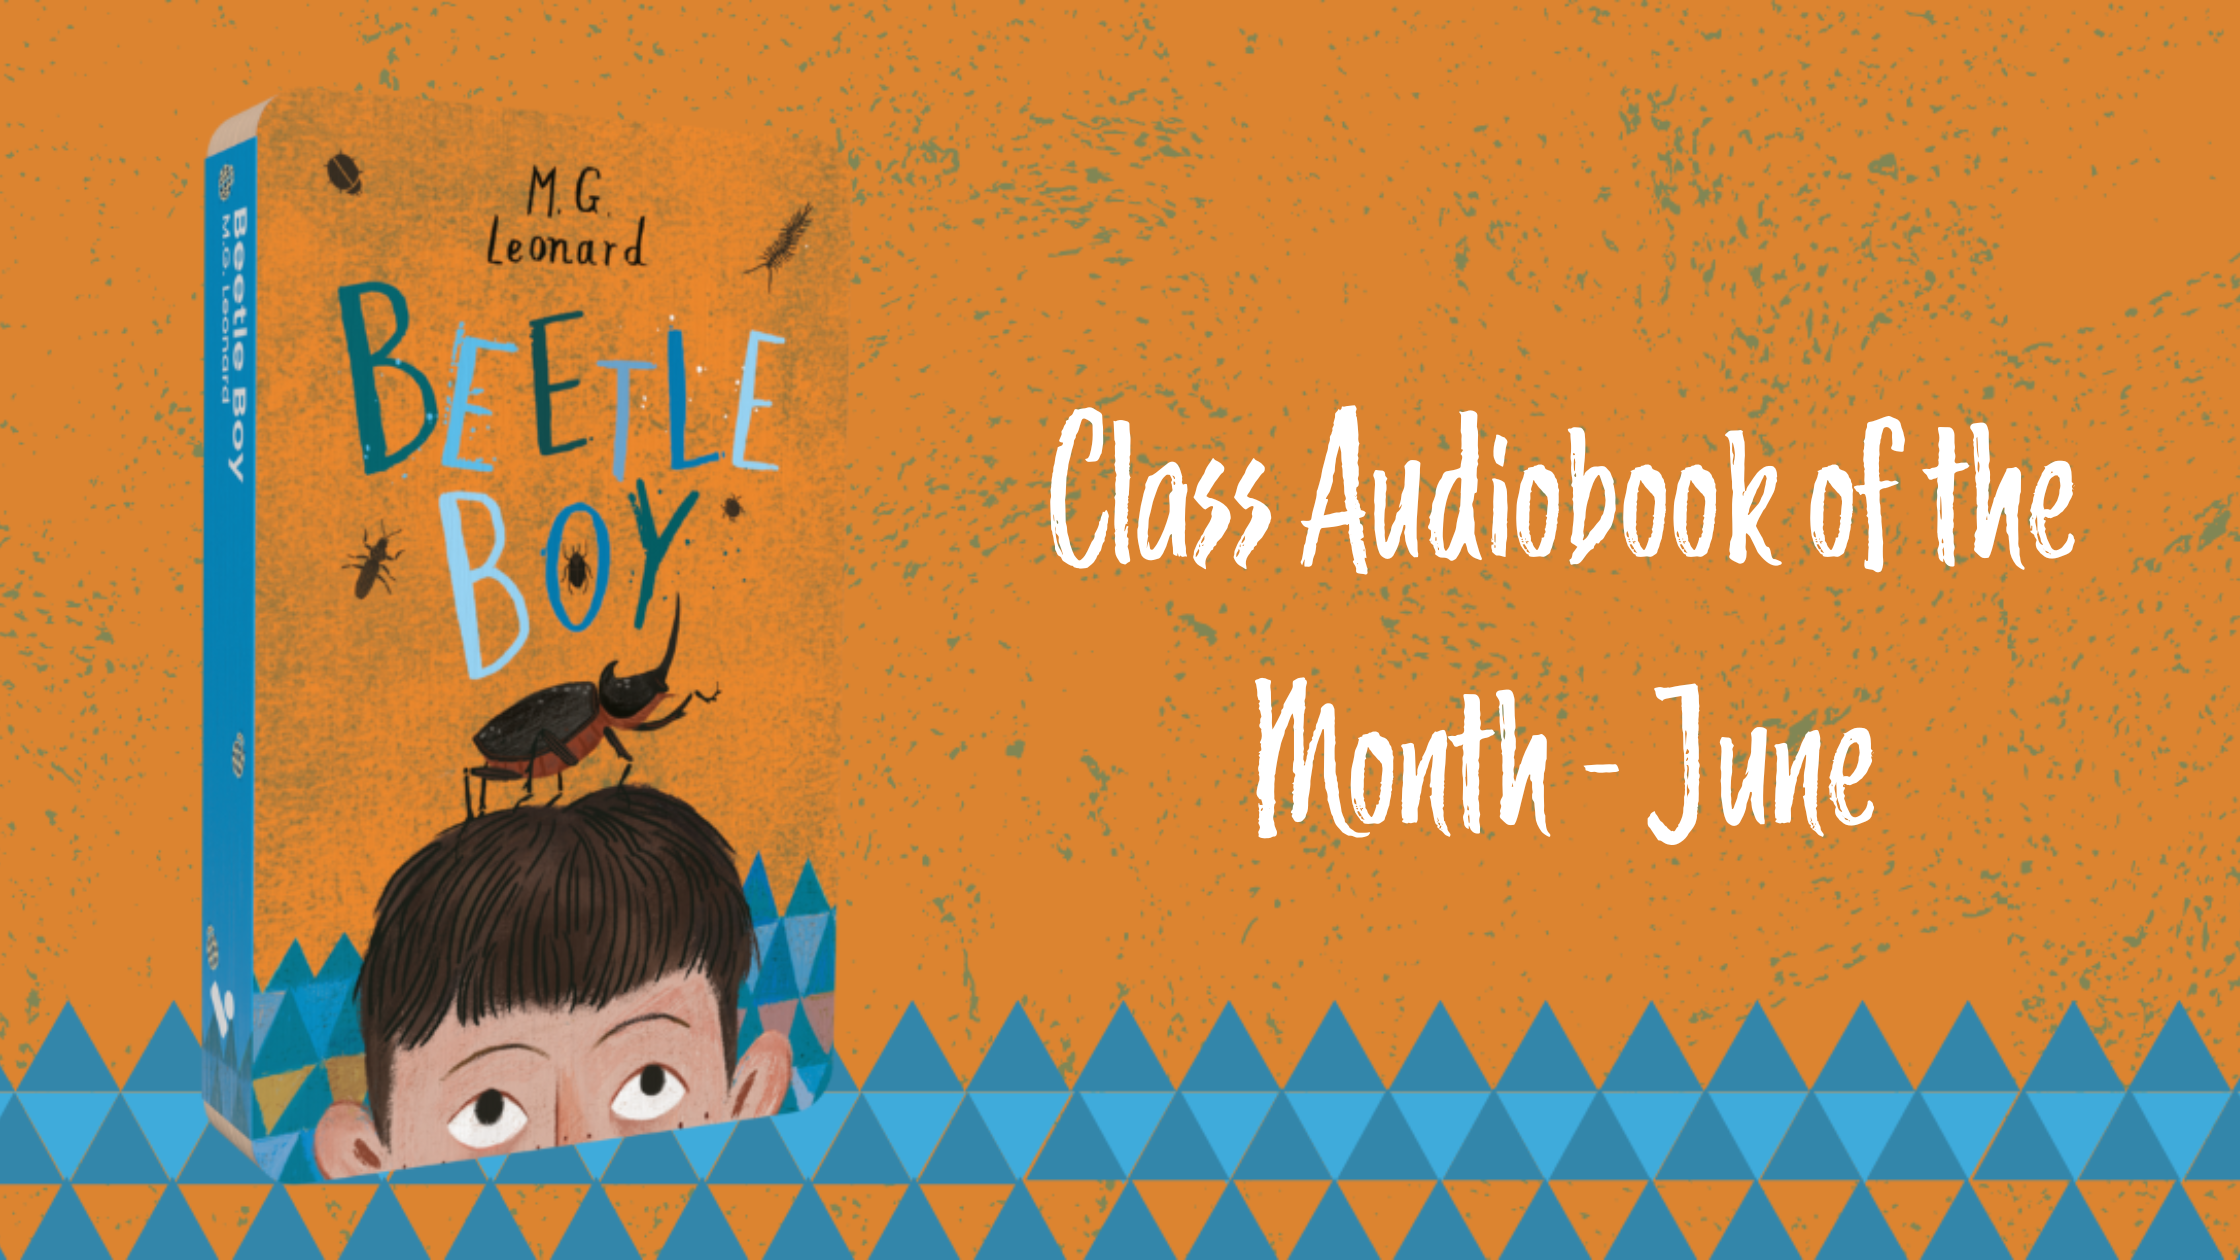 Beetle Boy: Class Audiobook of the Month - June